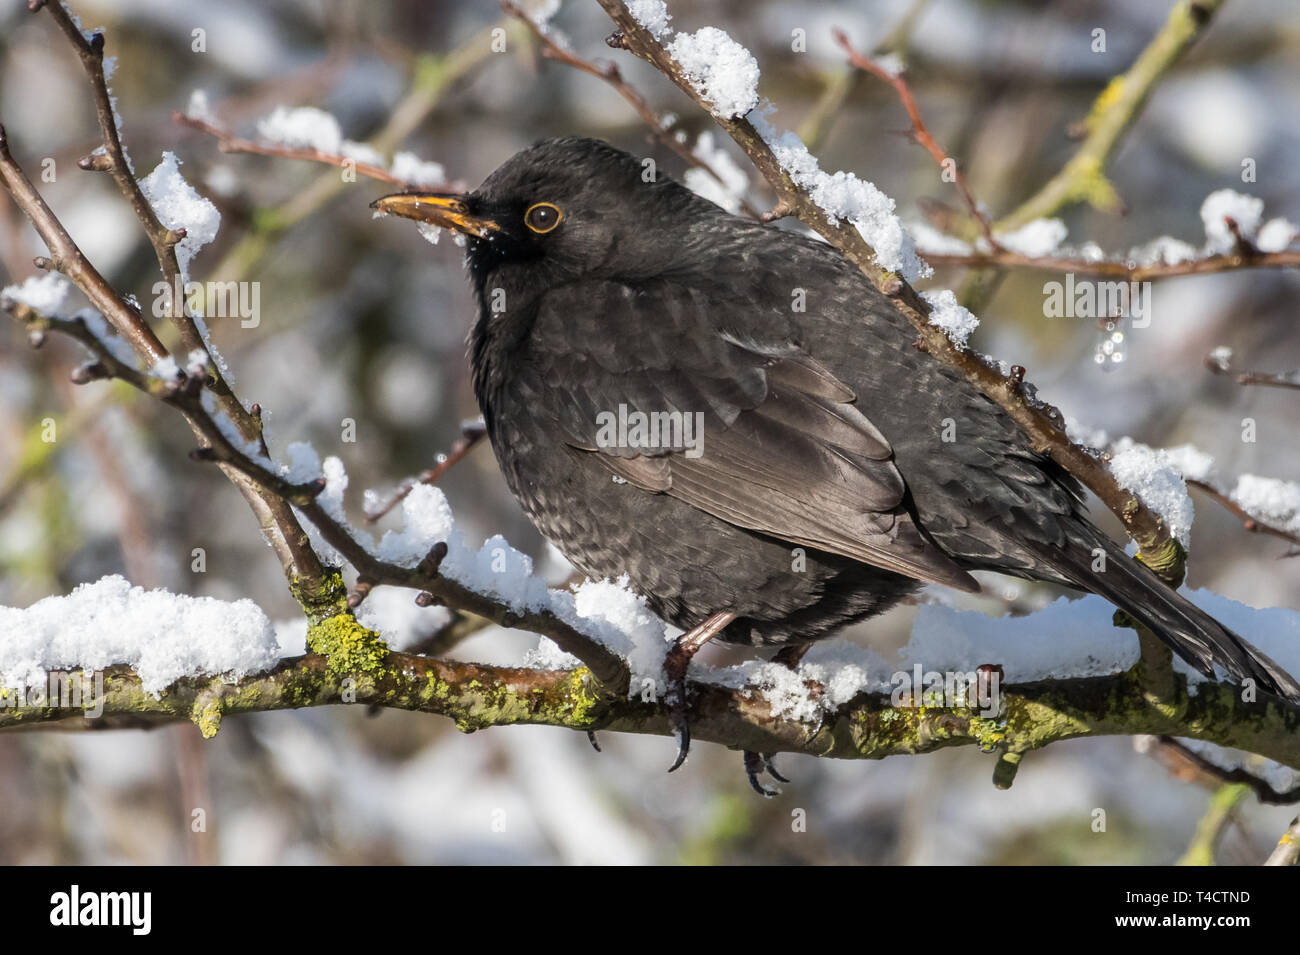 Blackbird with red berries of blueberry in its beak in a park in winter Stock Photo